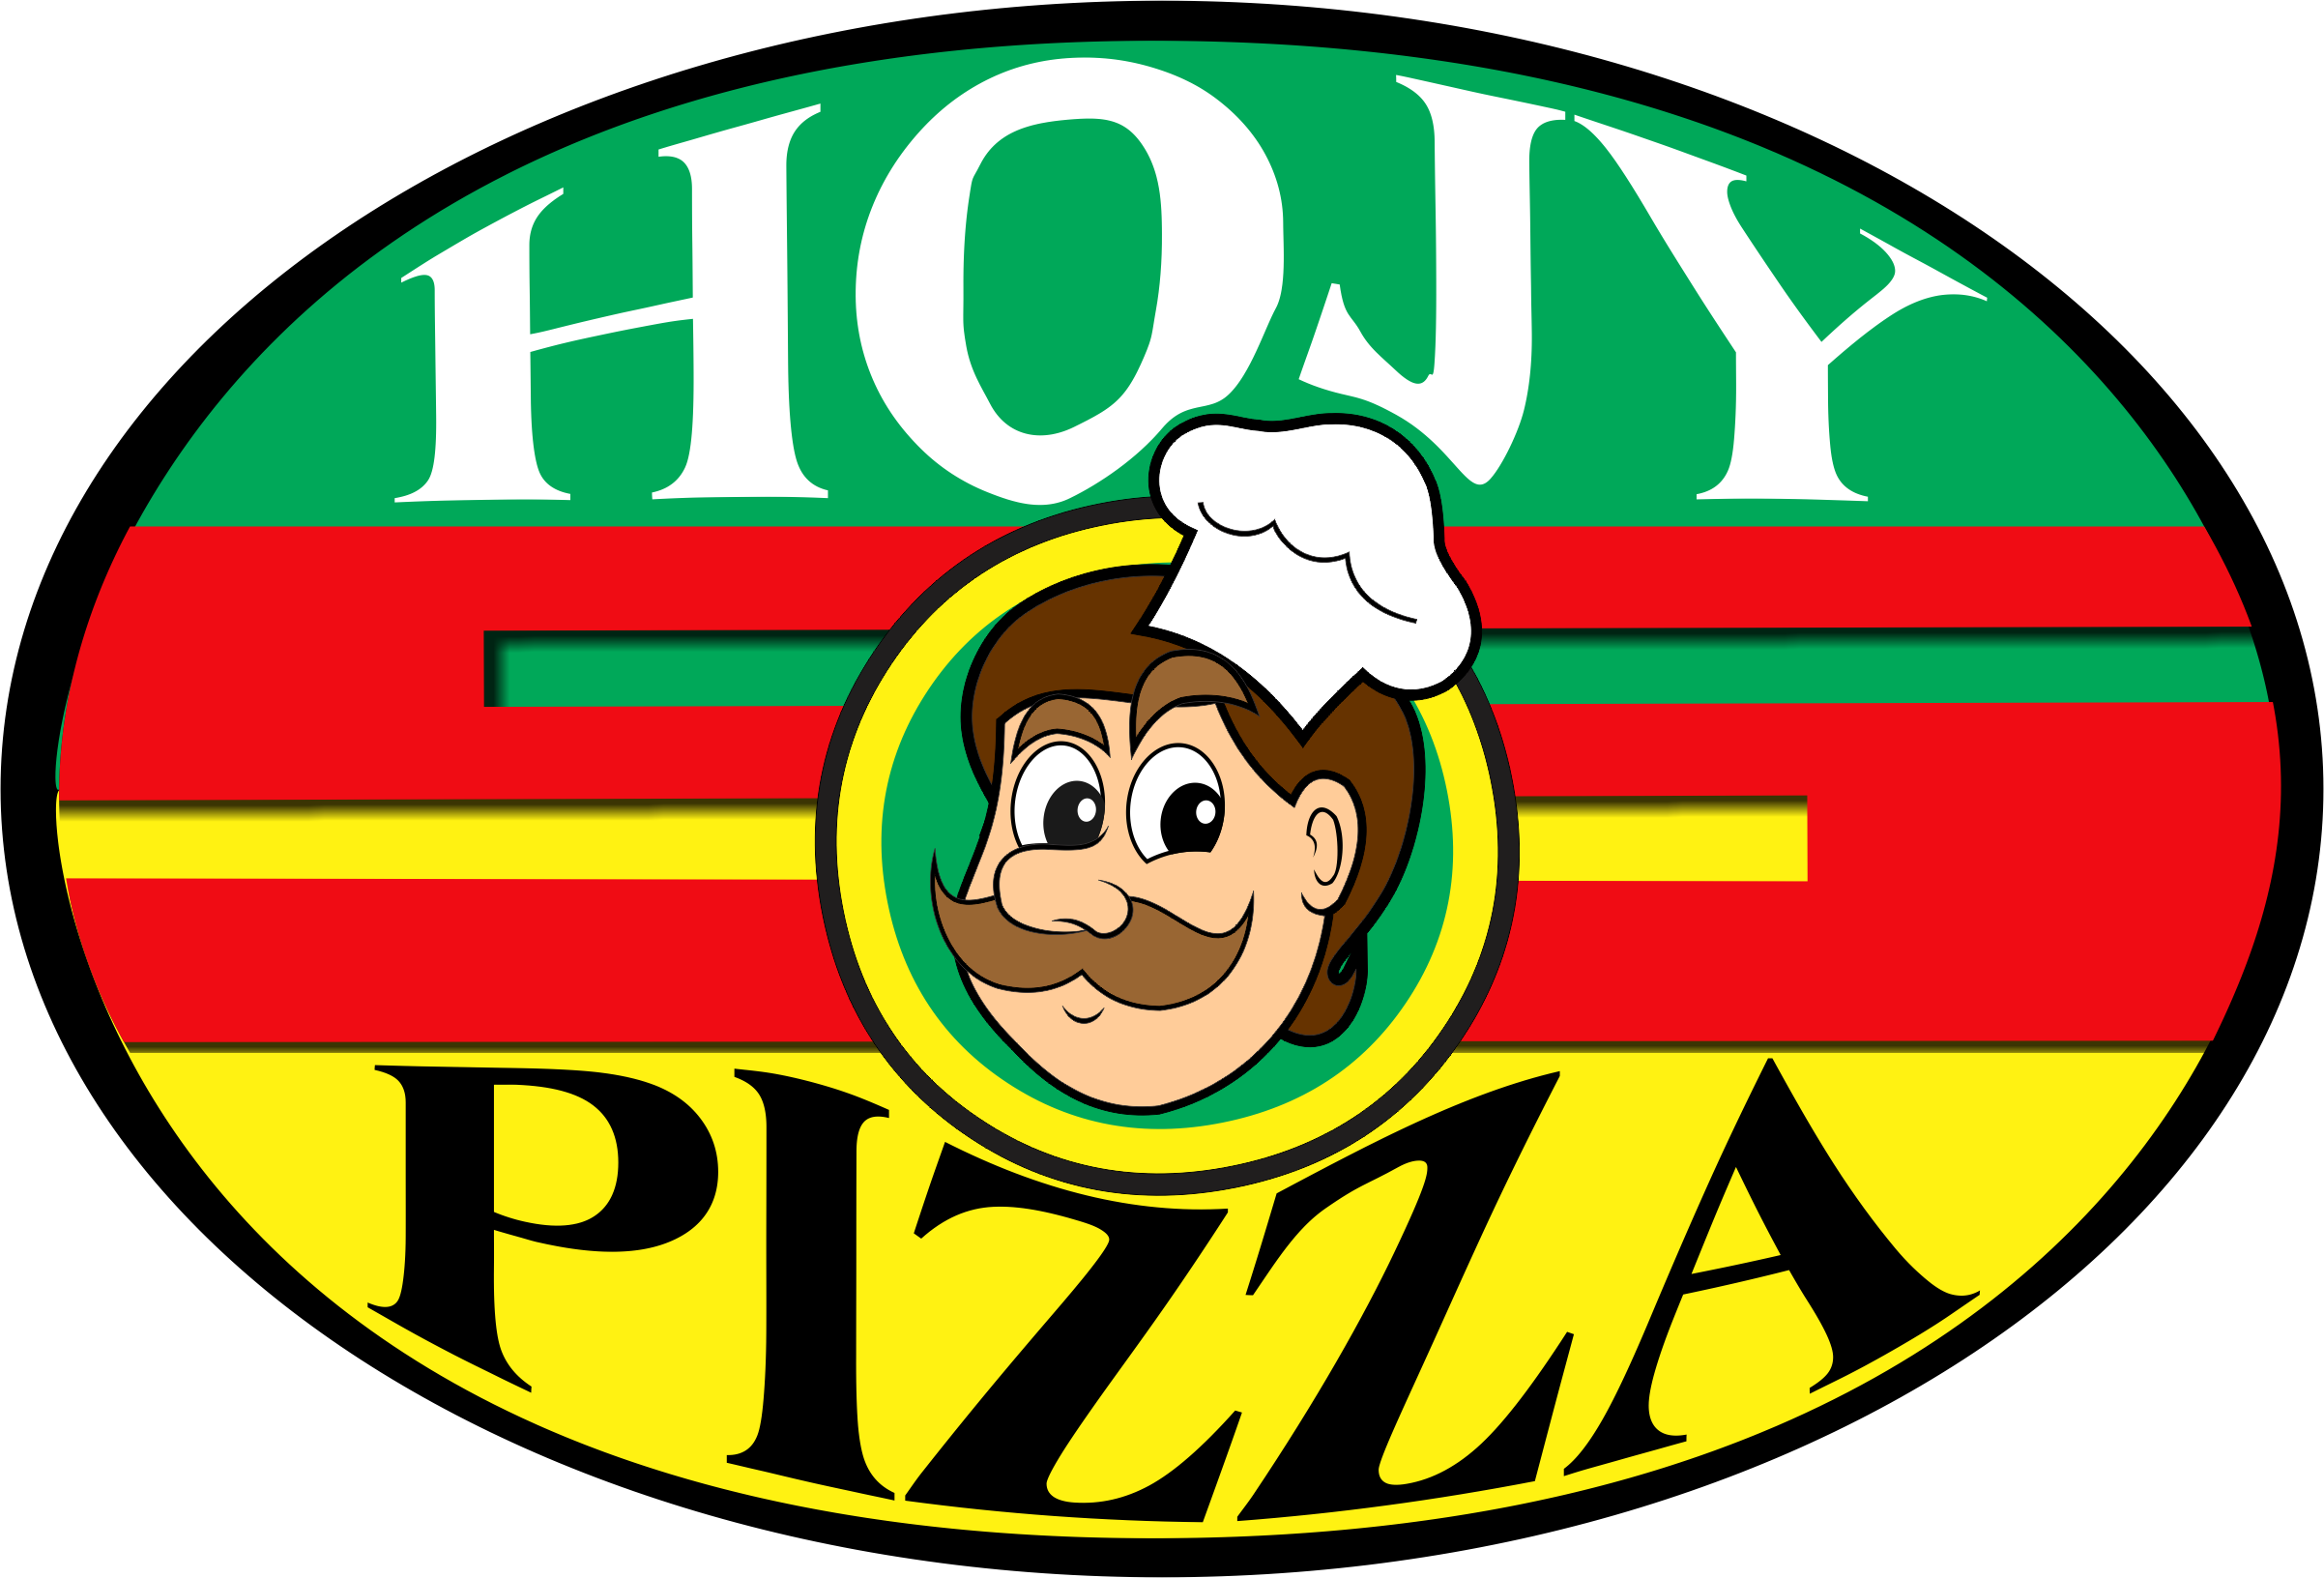 Hojy's Pizza - Hojy's Pizza Special (2404x1632)